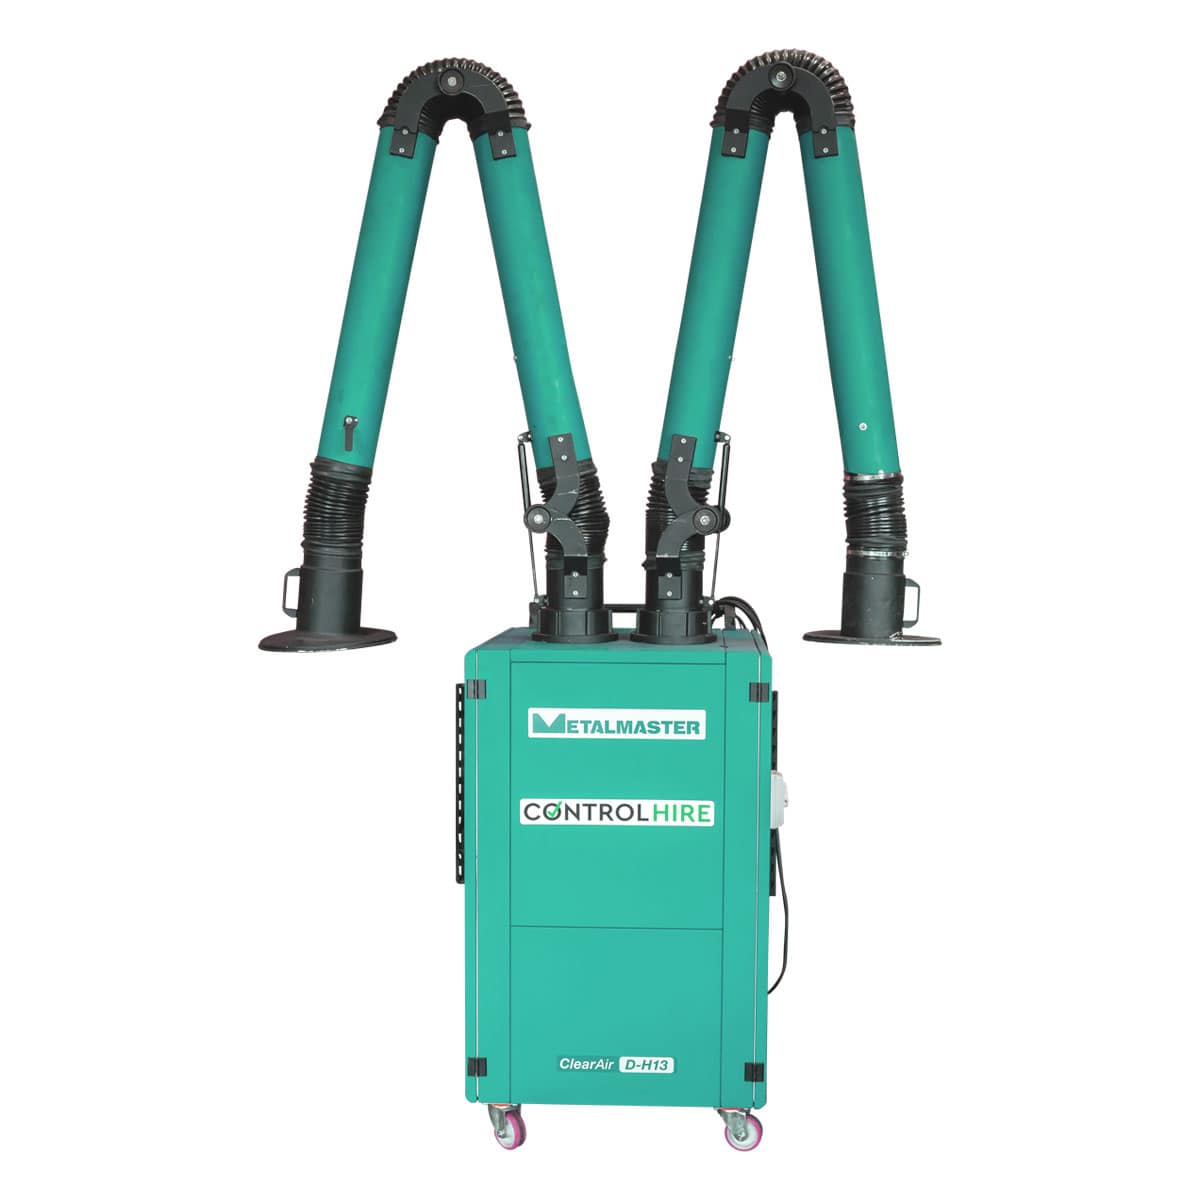 Twin Arm Mobile Welding Fume Filter